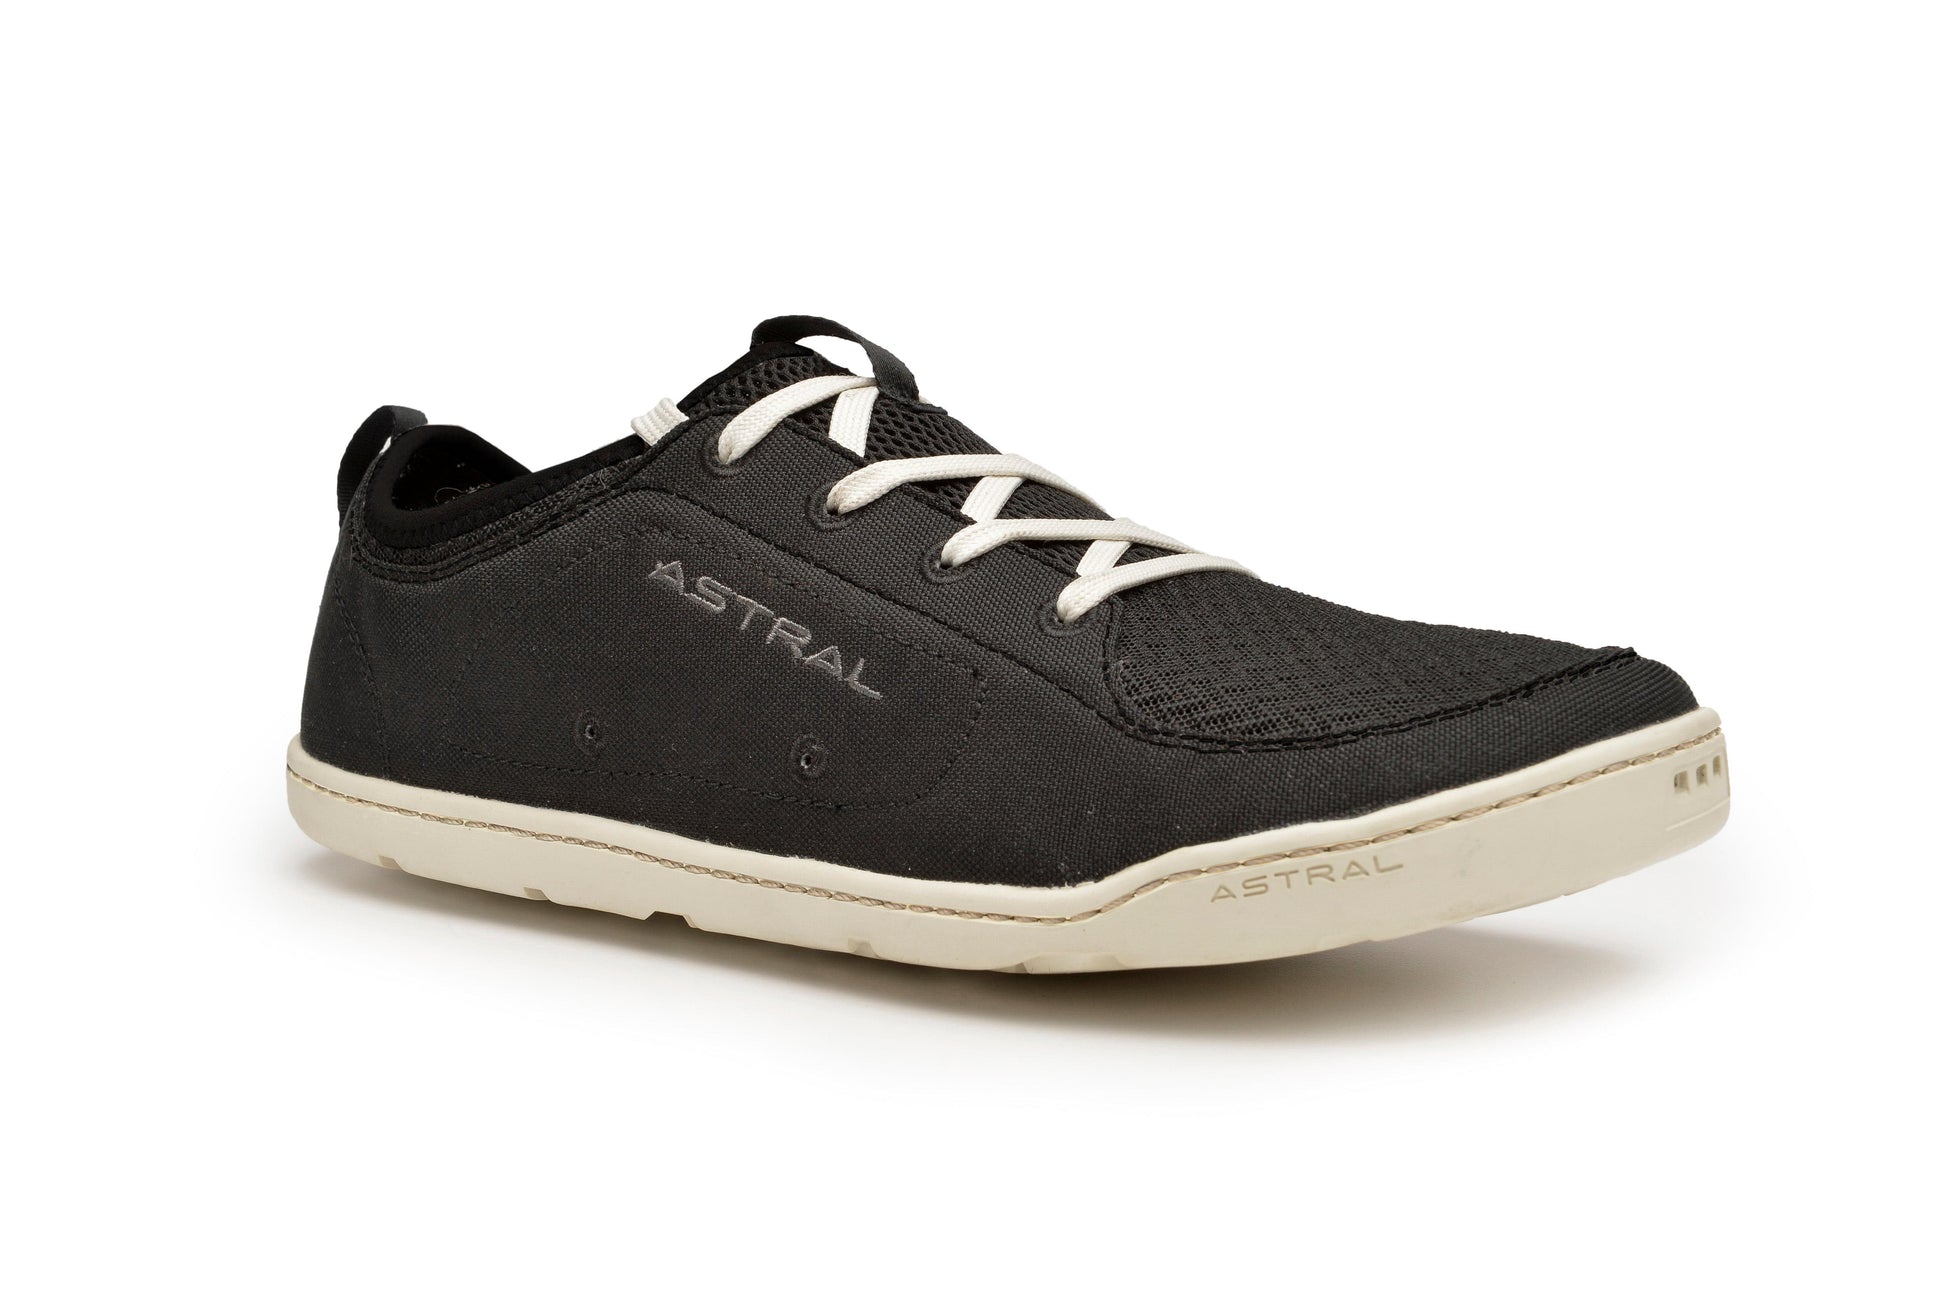 Featuring the Loyak - Youth men's footwear, women's footwear manufactured by Astral shown here from a second angle.